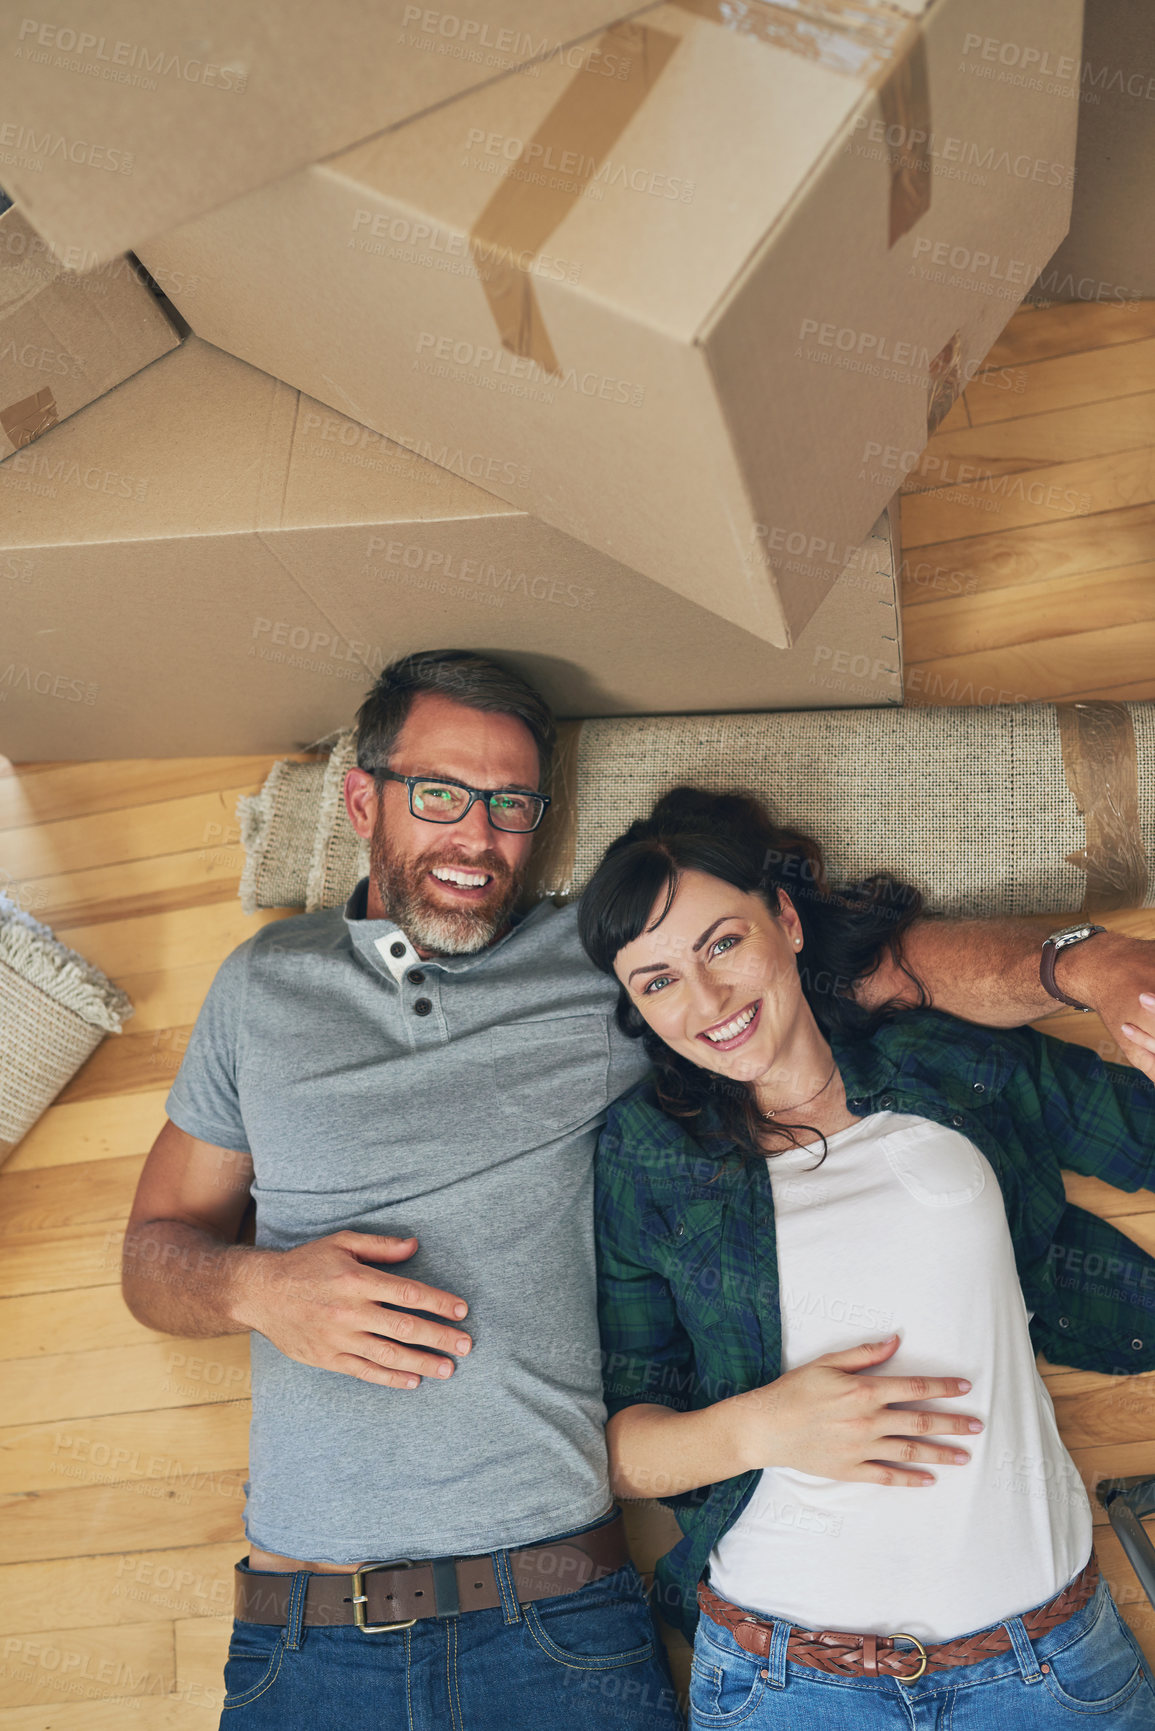 Buy stock photo High angle portrait of a happy couple relaxing together in their home on moving day